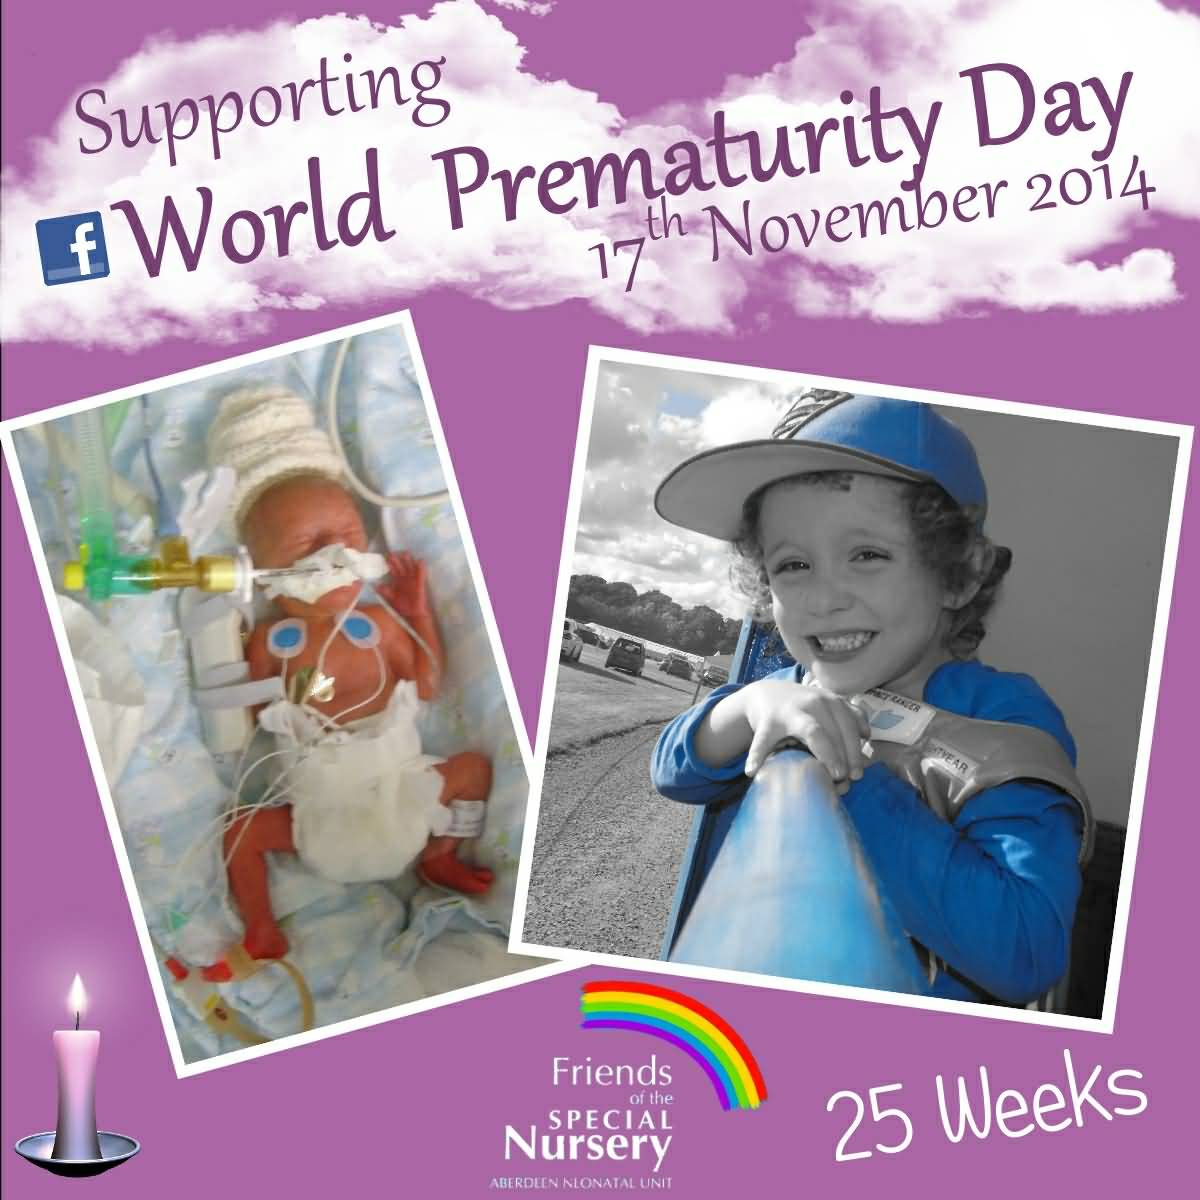 Supporting World Prematurity Day 17th November